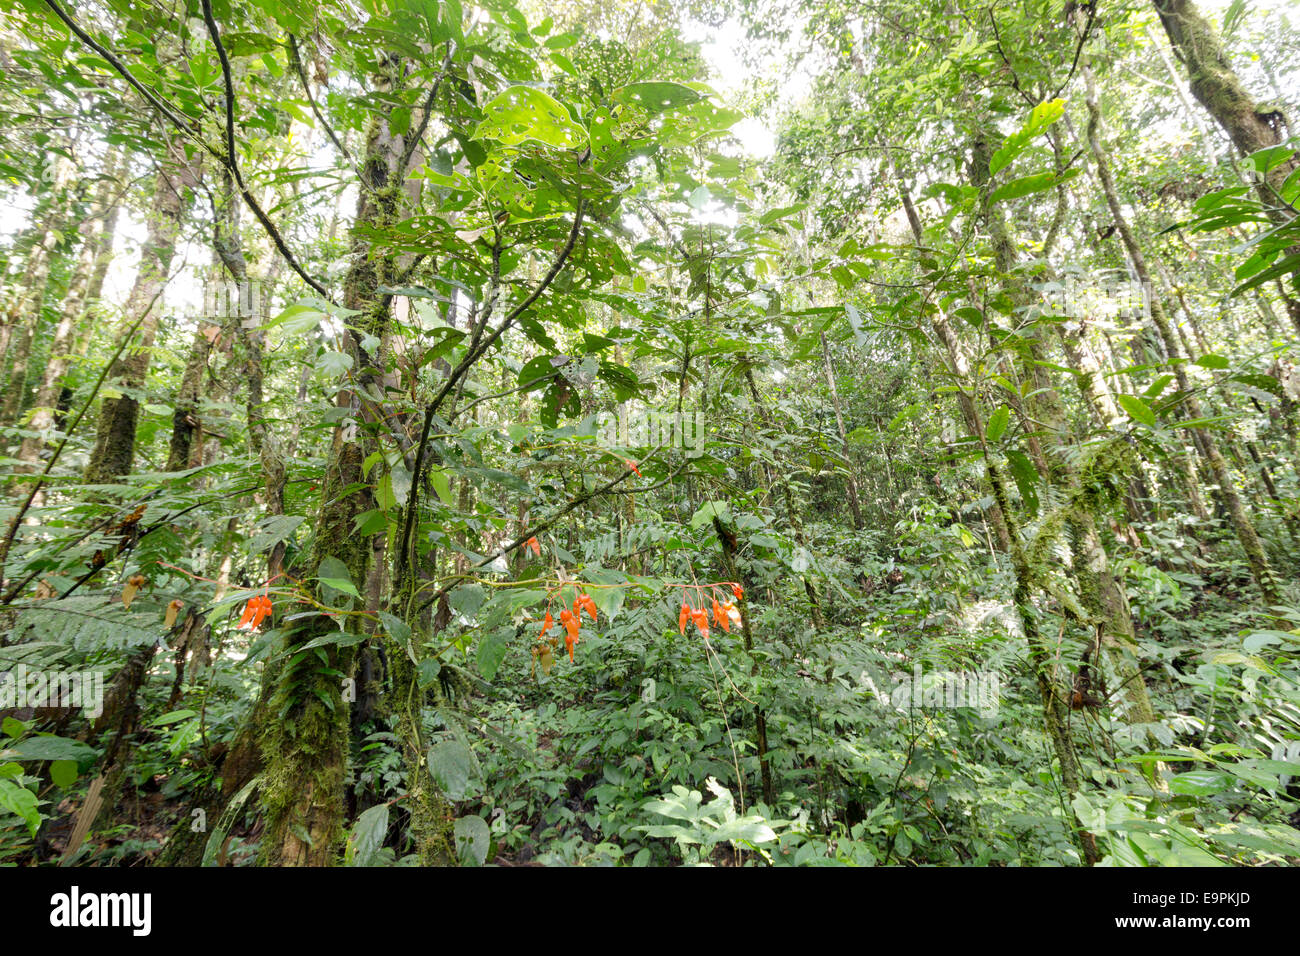 Interior of tropical rainforest in the Ecuadorian Amazon with a flowering Begonia in the foreground Stock Photo